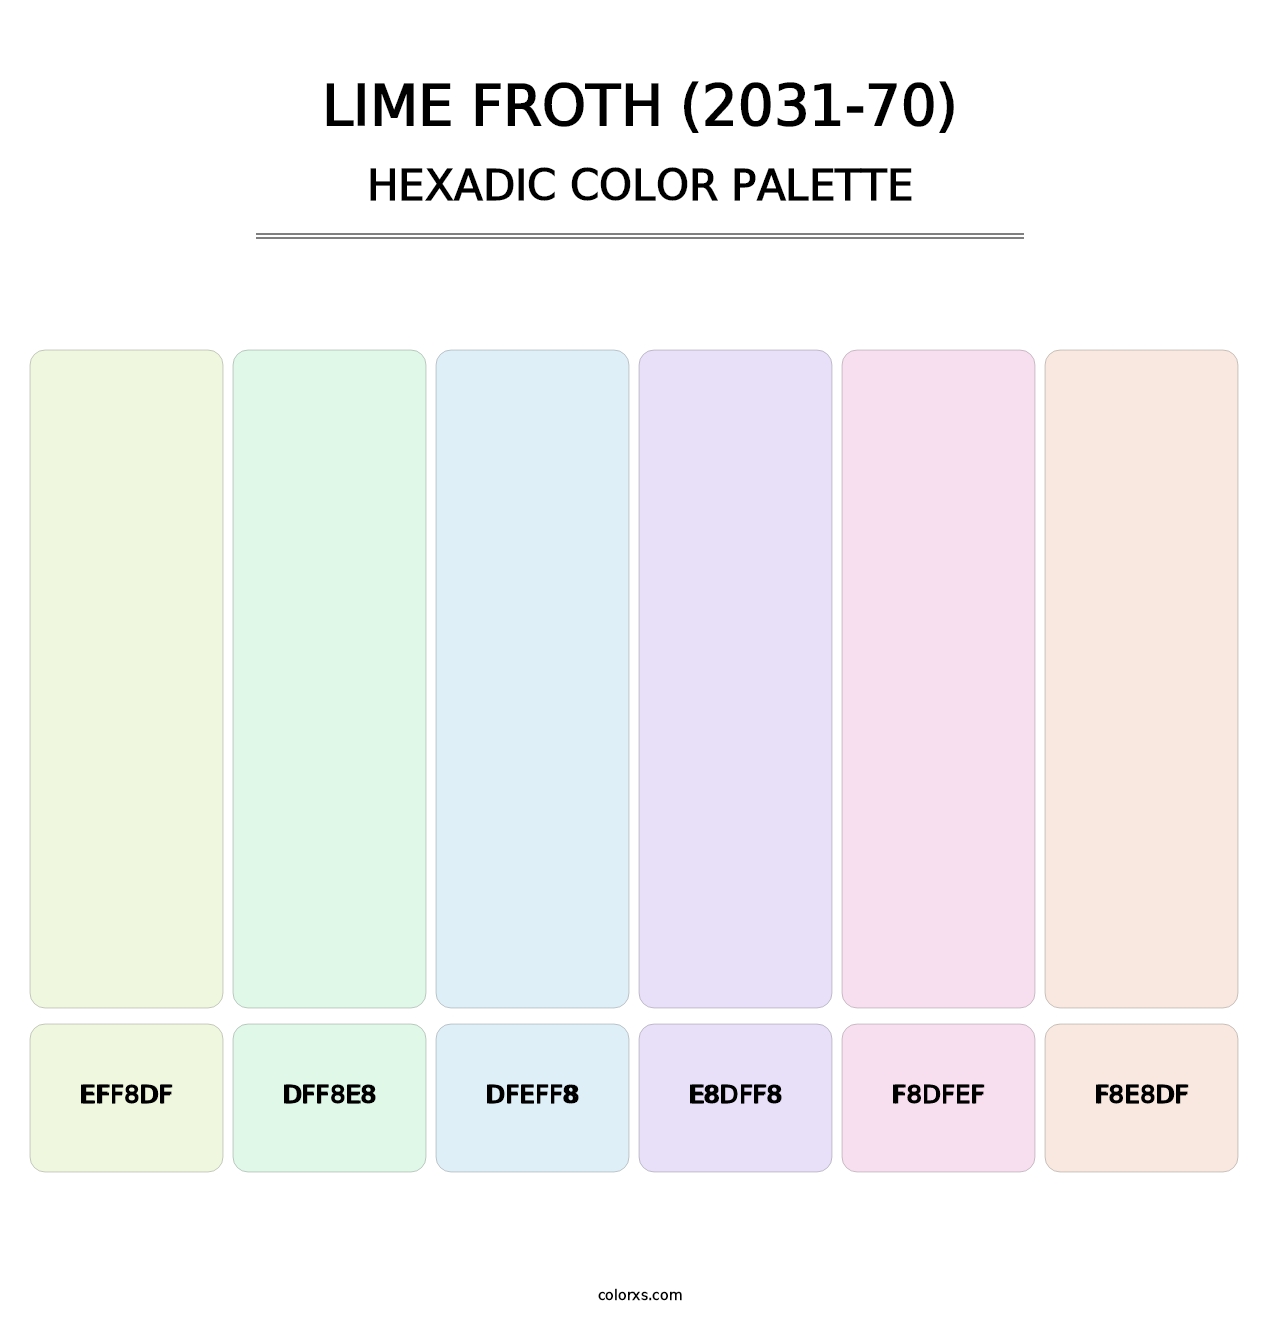 Lime Froth (2031-70) - Hexadic Color Palette